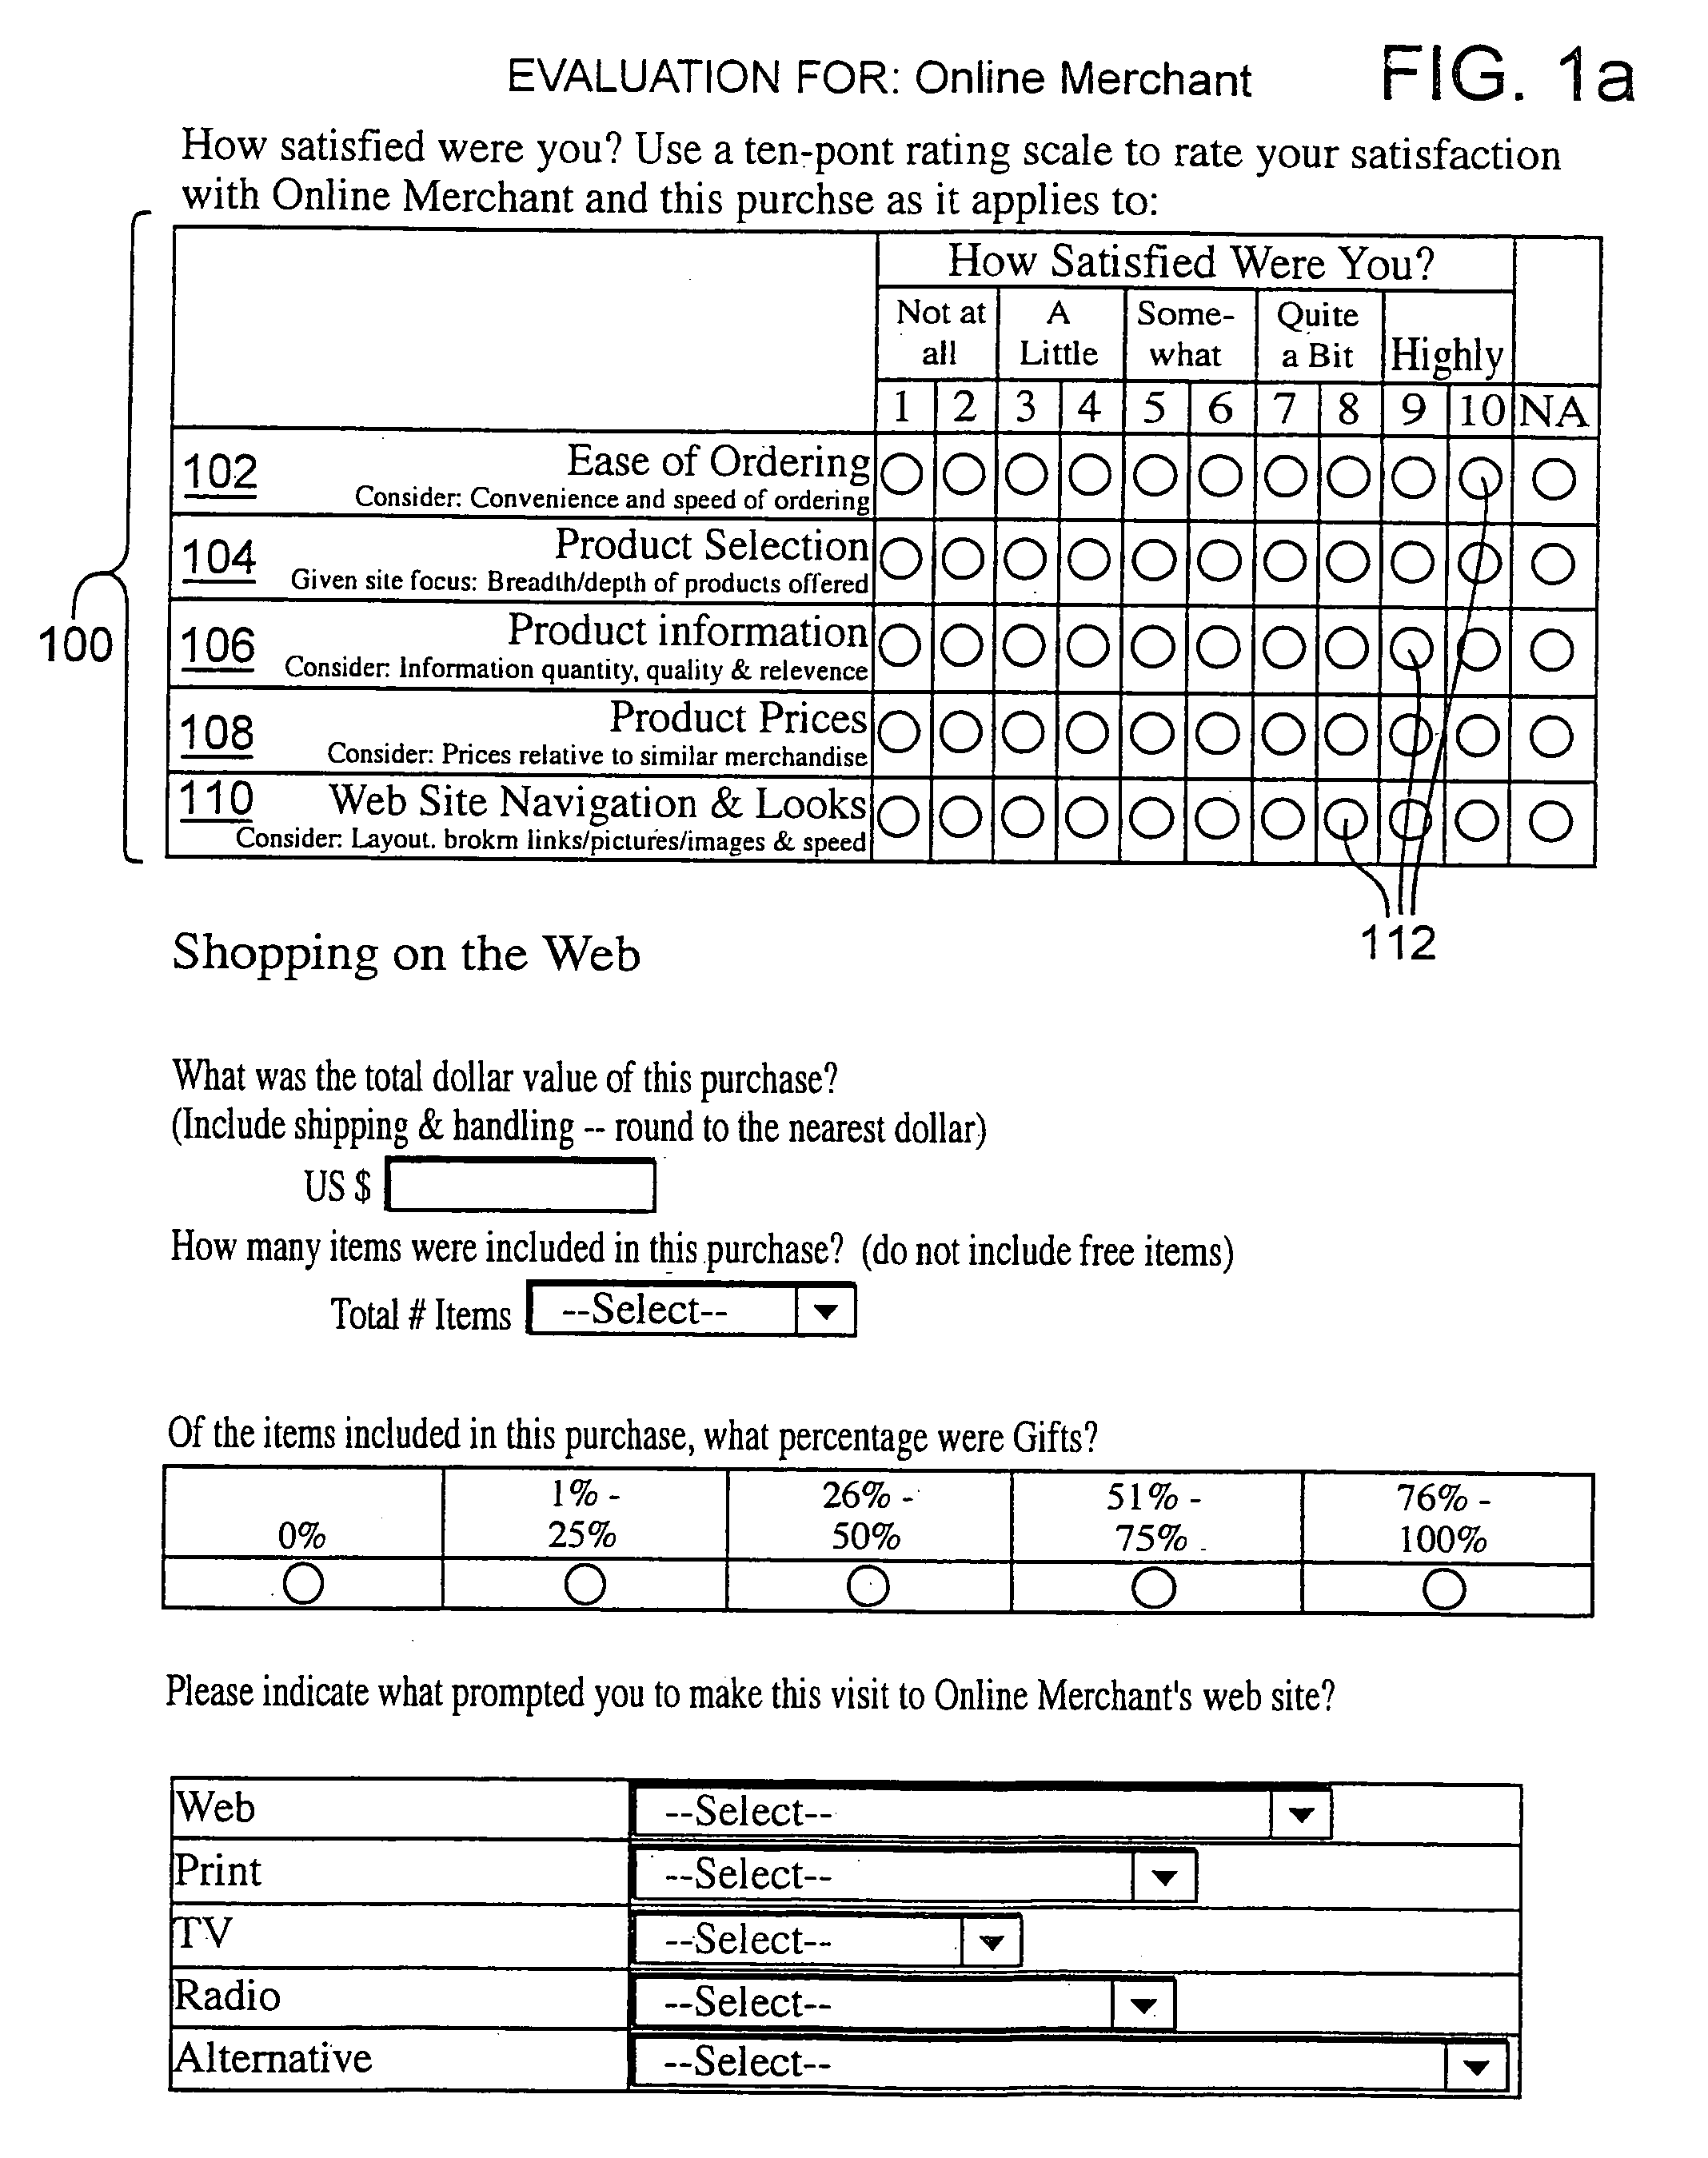 System and method for data collection, evaluation, information generation, and presentation